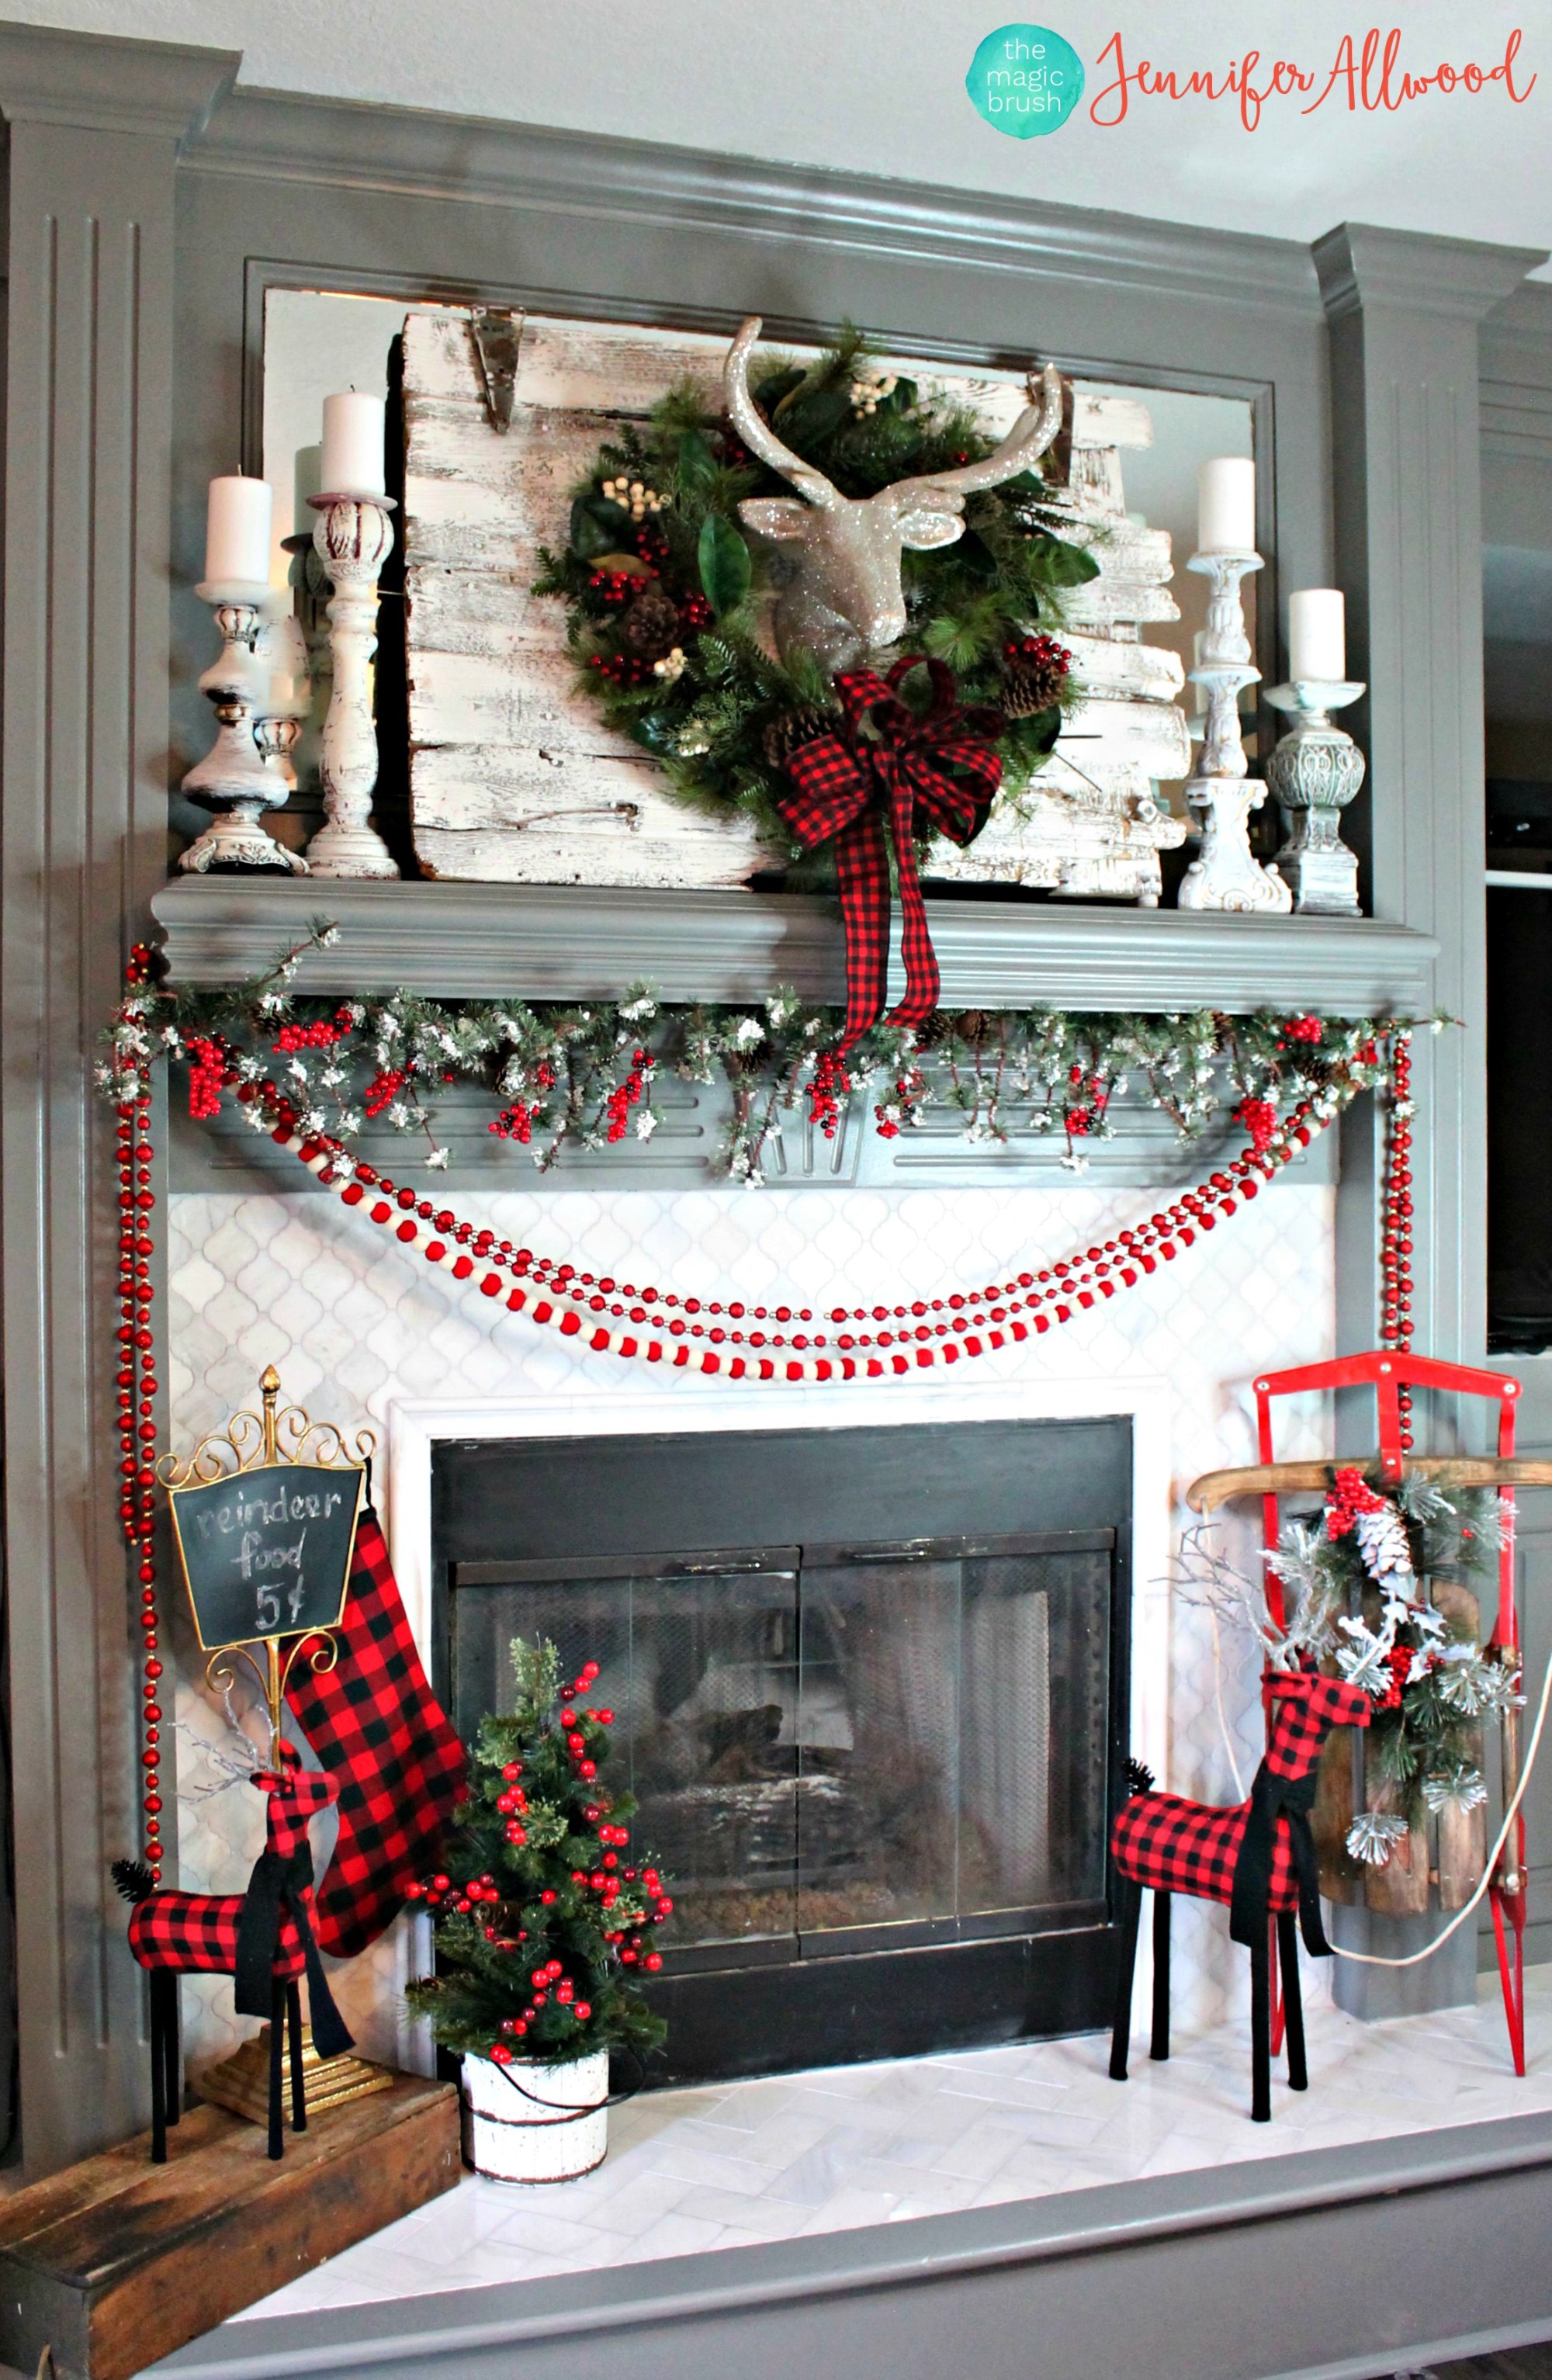 A fireplace with red garland and a large wreath above it.